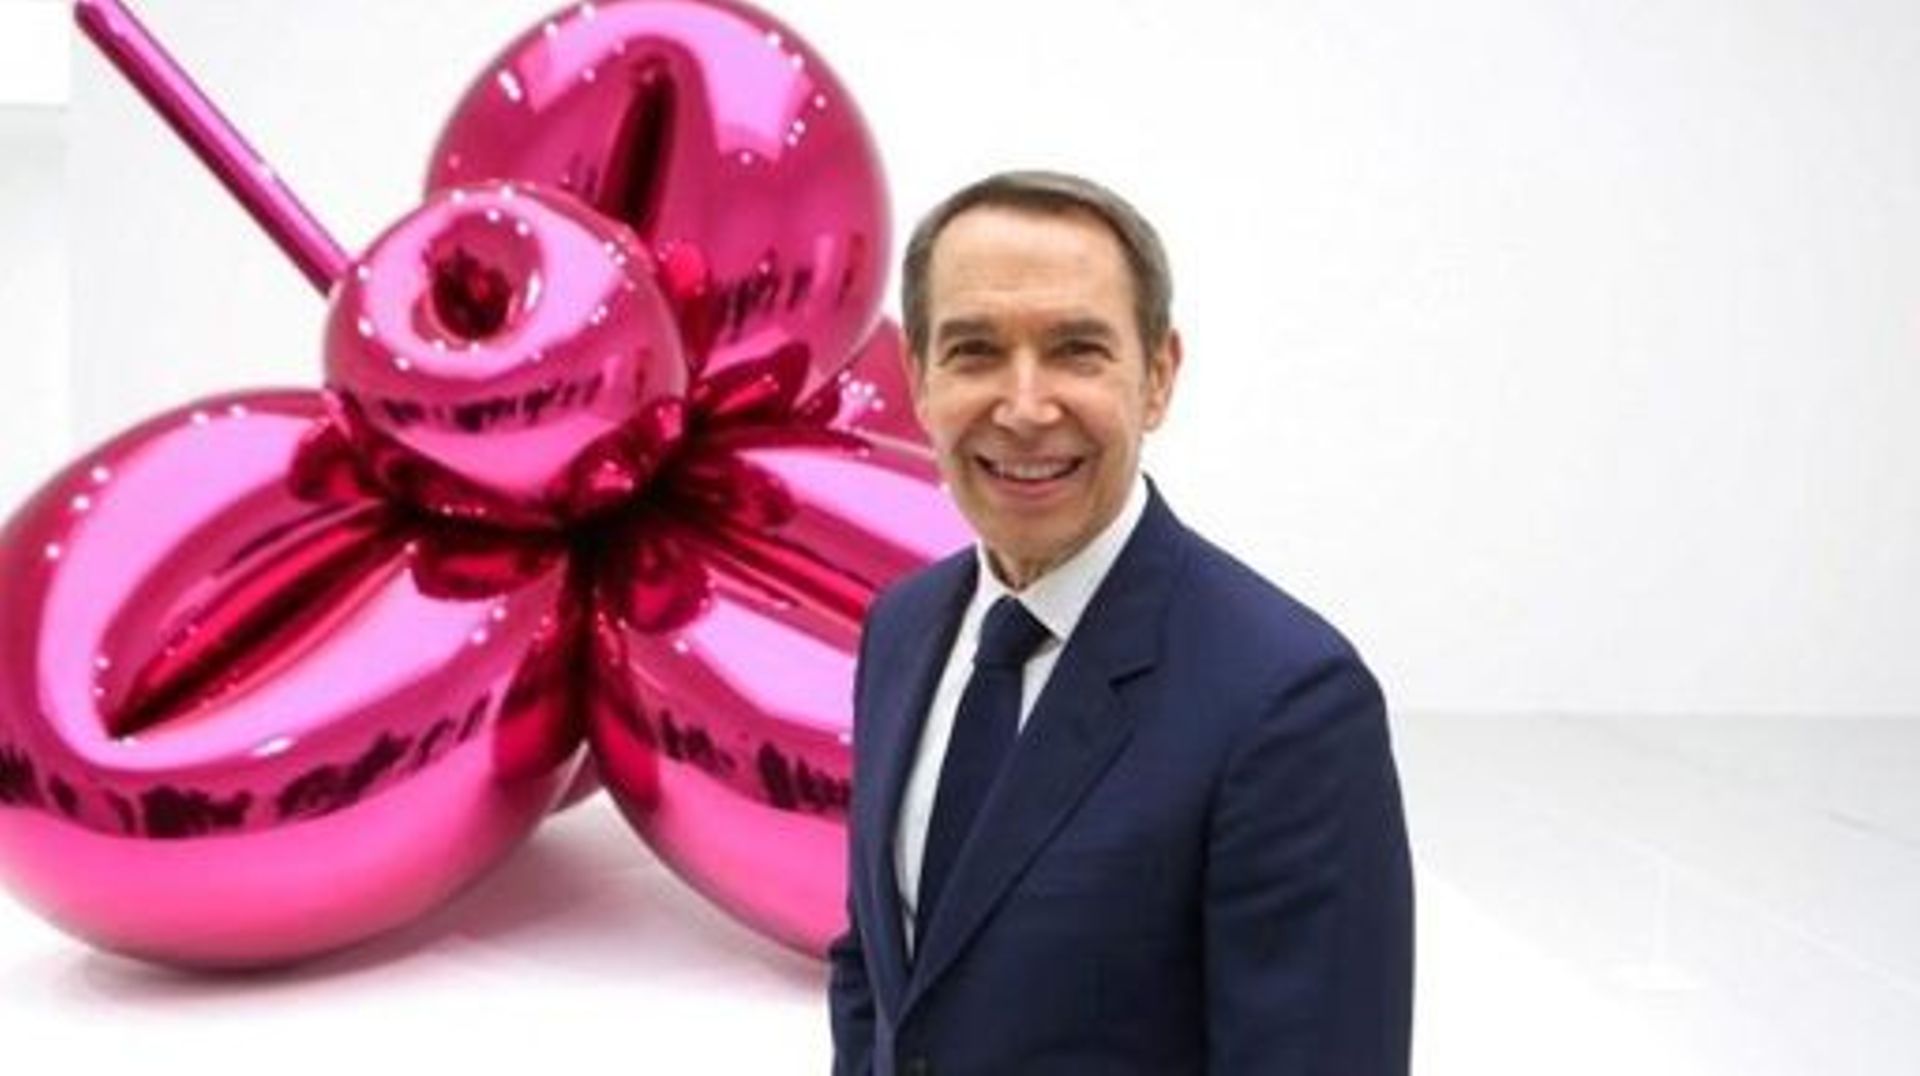 US artist Jeff Koons poses in front of his Balloon Flower exhibited at the Qatar Museum Alriwaq gallery in Doha on November 20, 2021. Curated by Massimiliano Gioni, the exhibition provides a unique view into the exceptional career of one of the world?s be